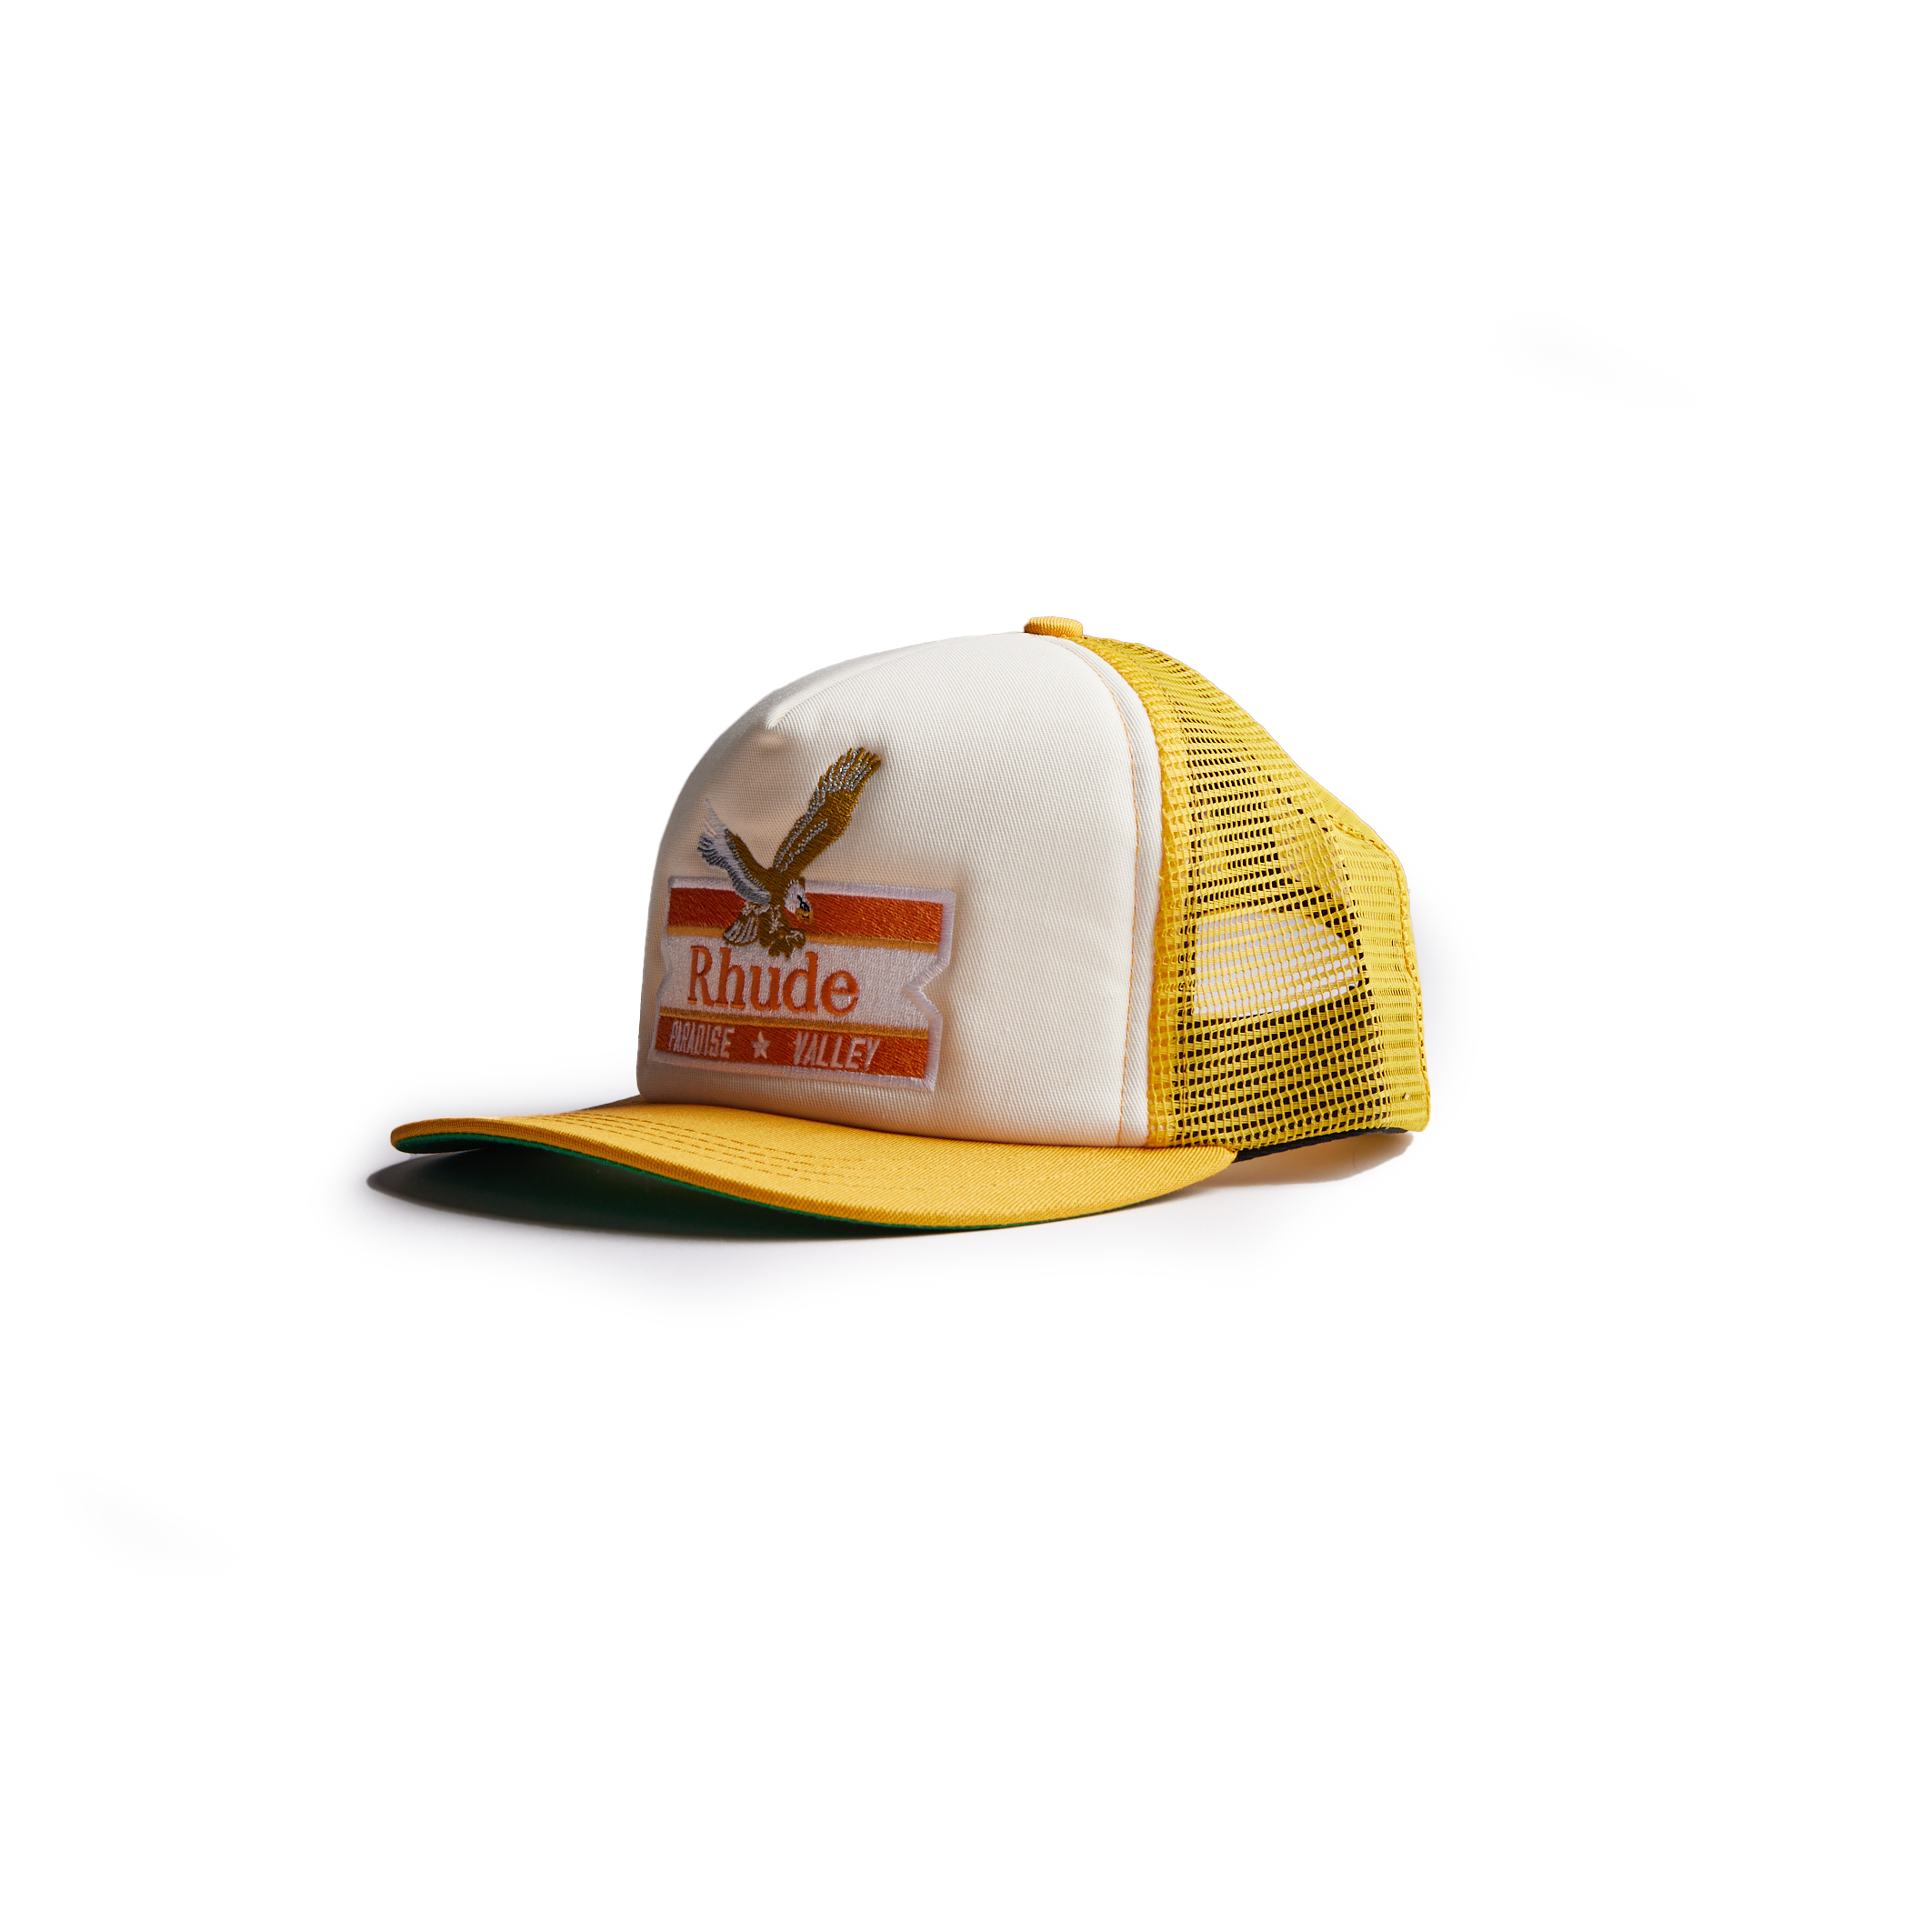 RHUDE - Paradise Valley Trucker Hat product image